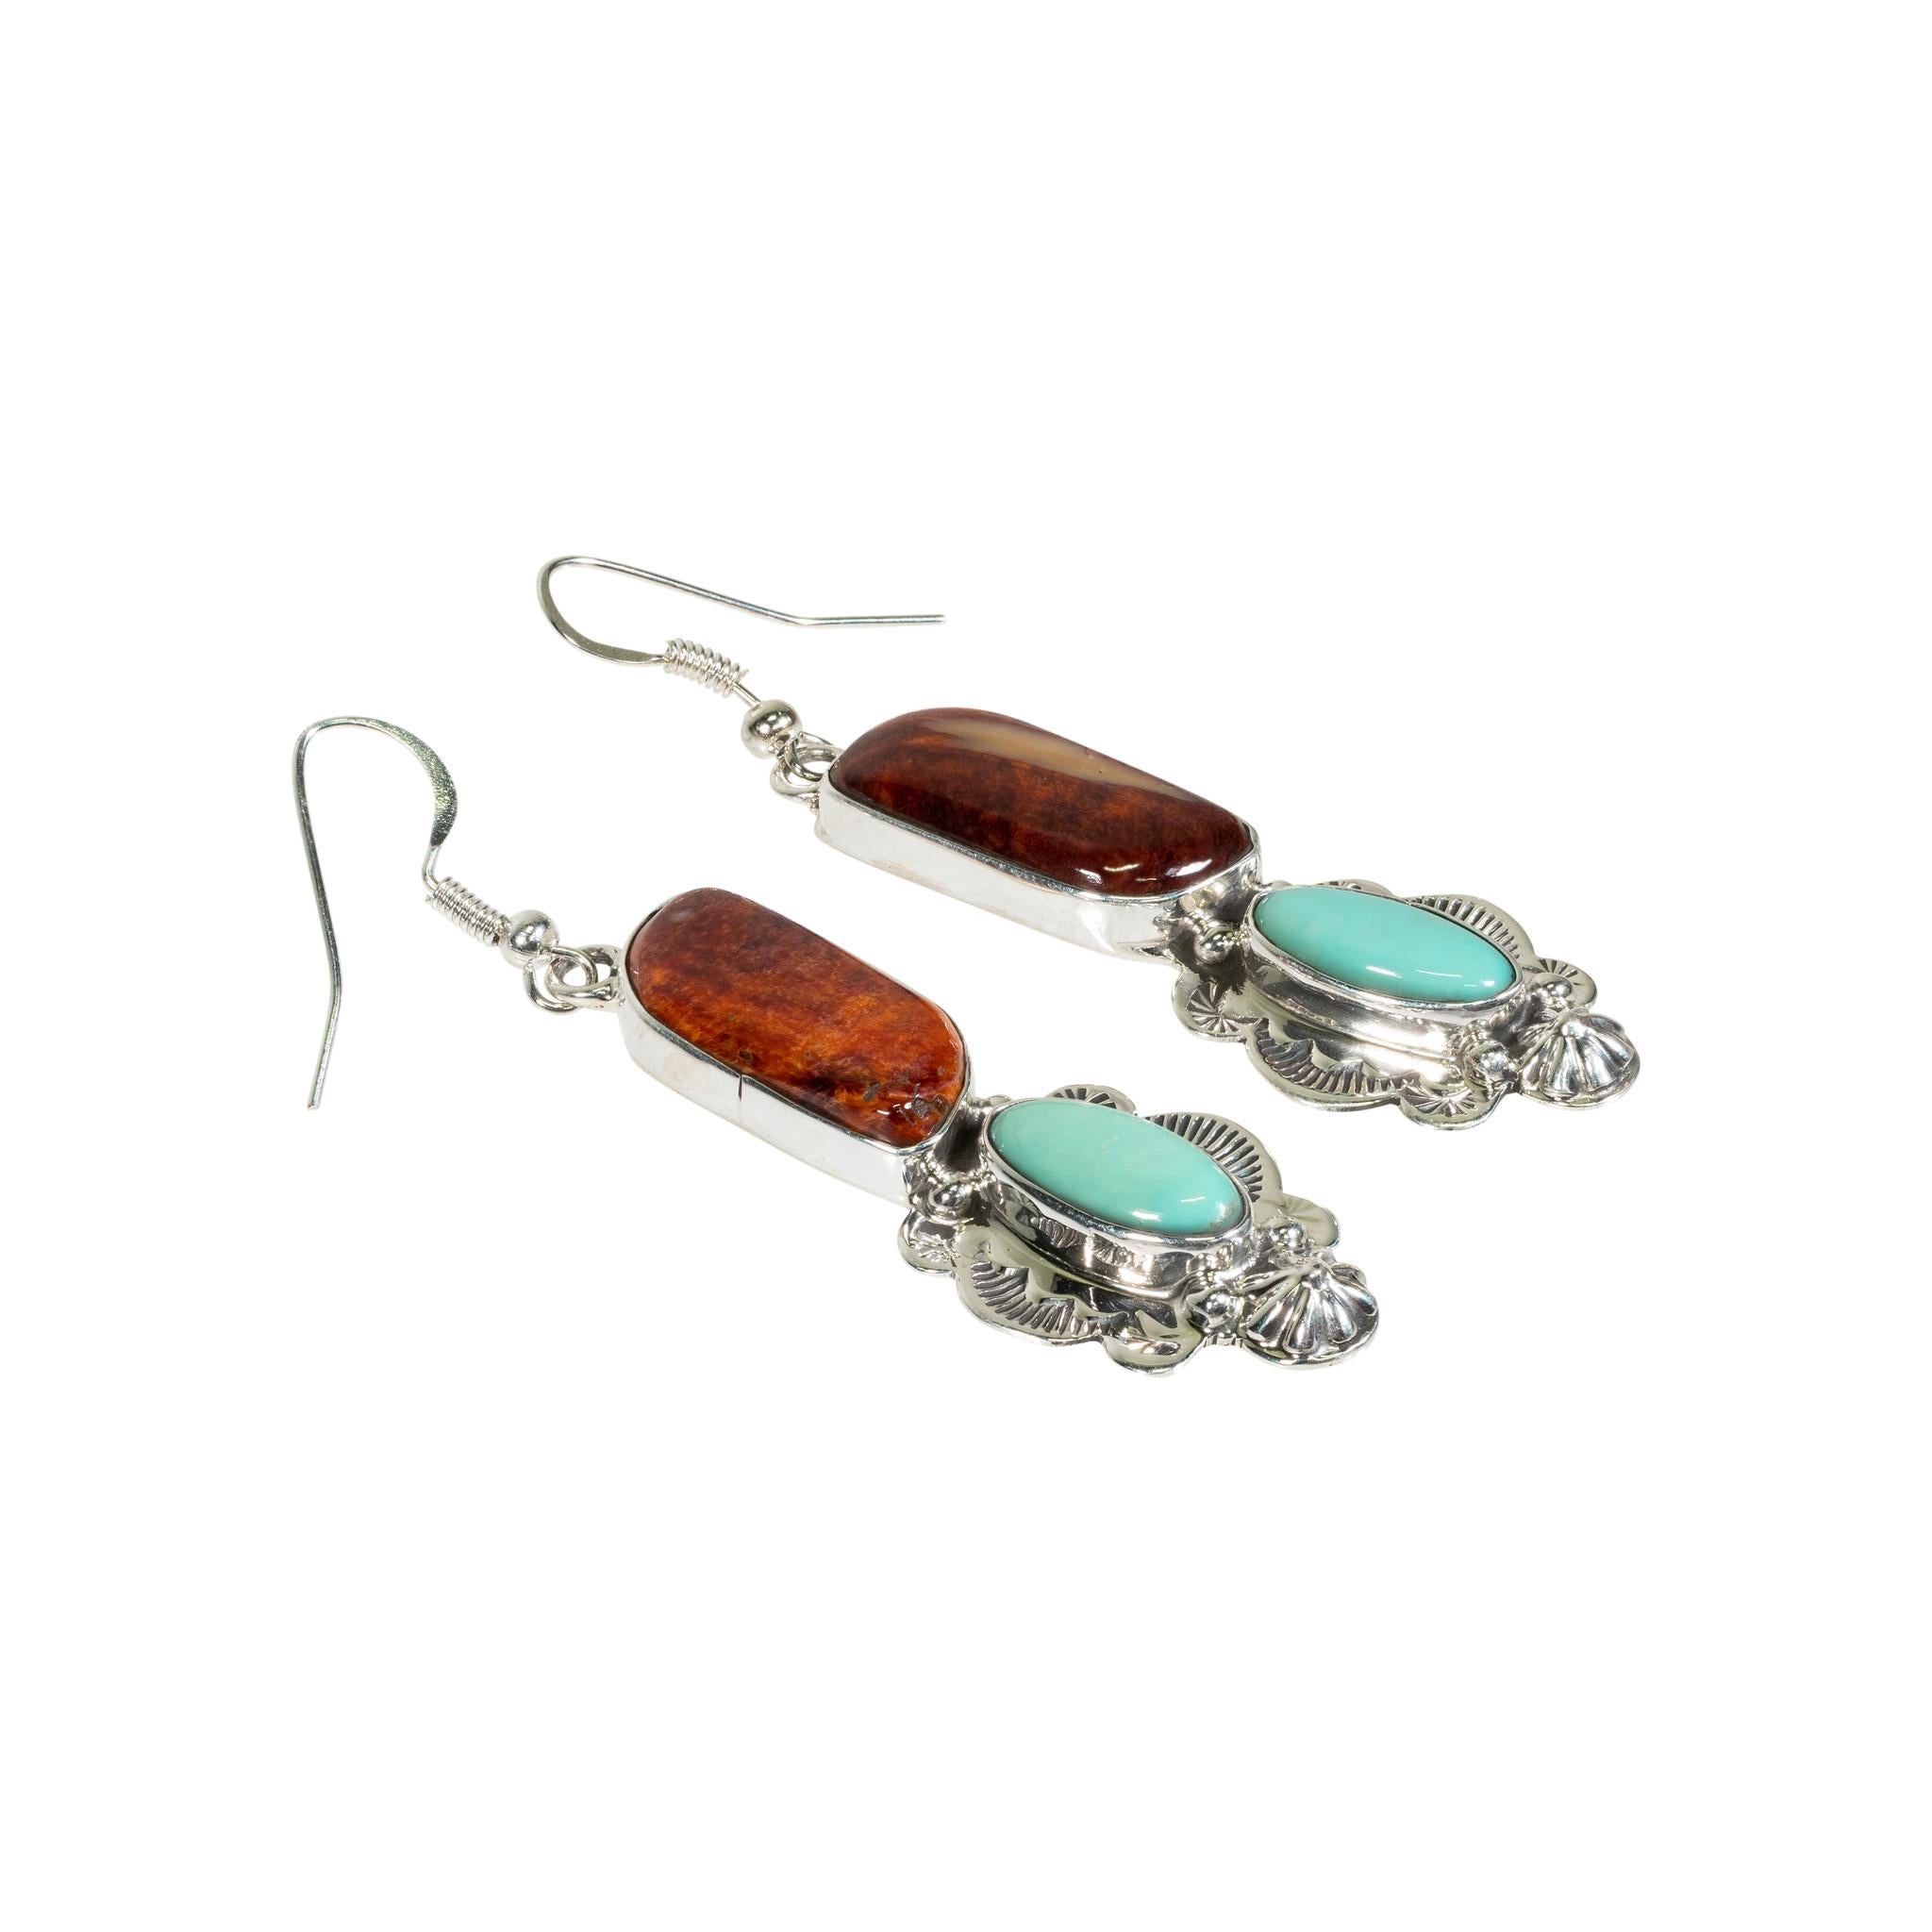 Navajo dangle earrings with purple spiny oyster stone at the top and a natural turquoise oblong stone at bottom. The turquoise is accented with a hand stamped frame. Marked “Sterling” and hallmarked “L”.

Period: After 1950
Dimensions: 12.6 grams,